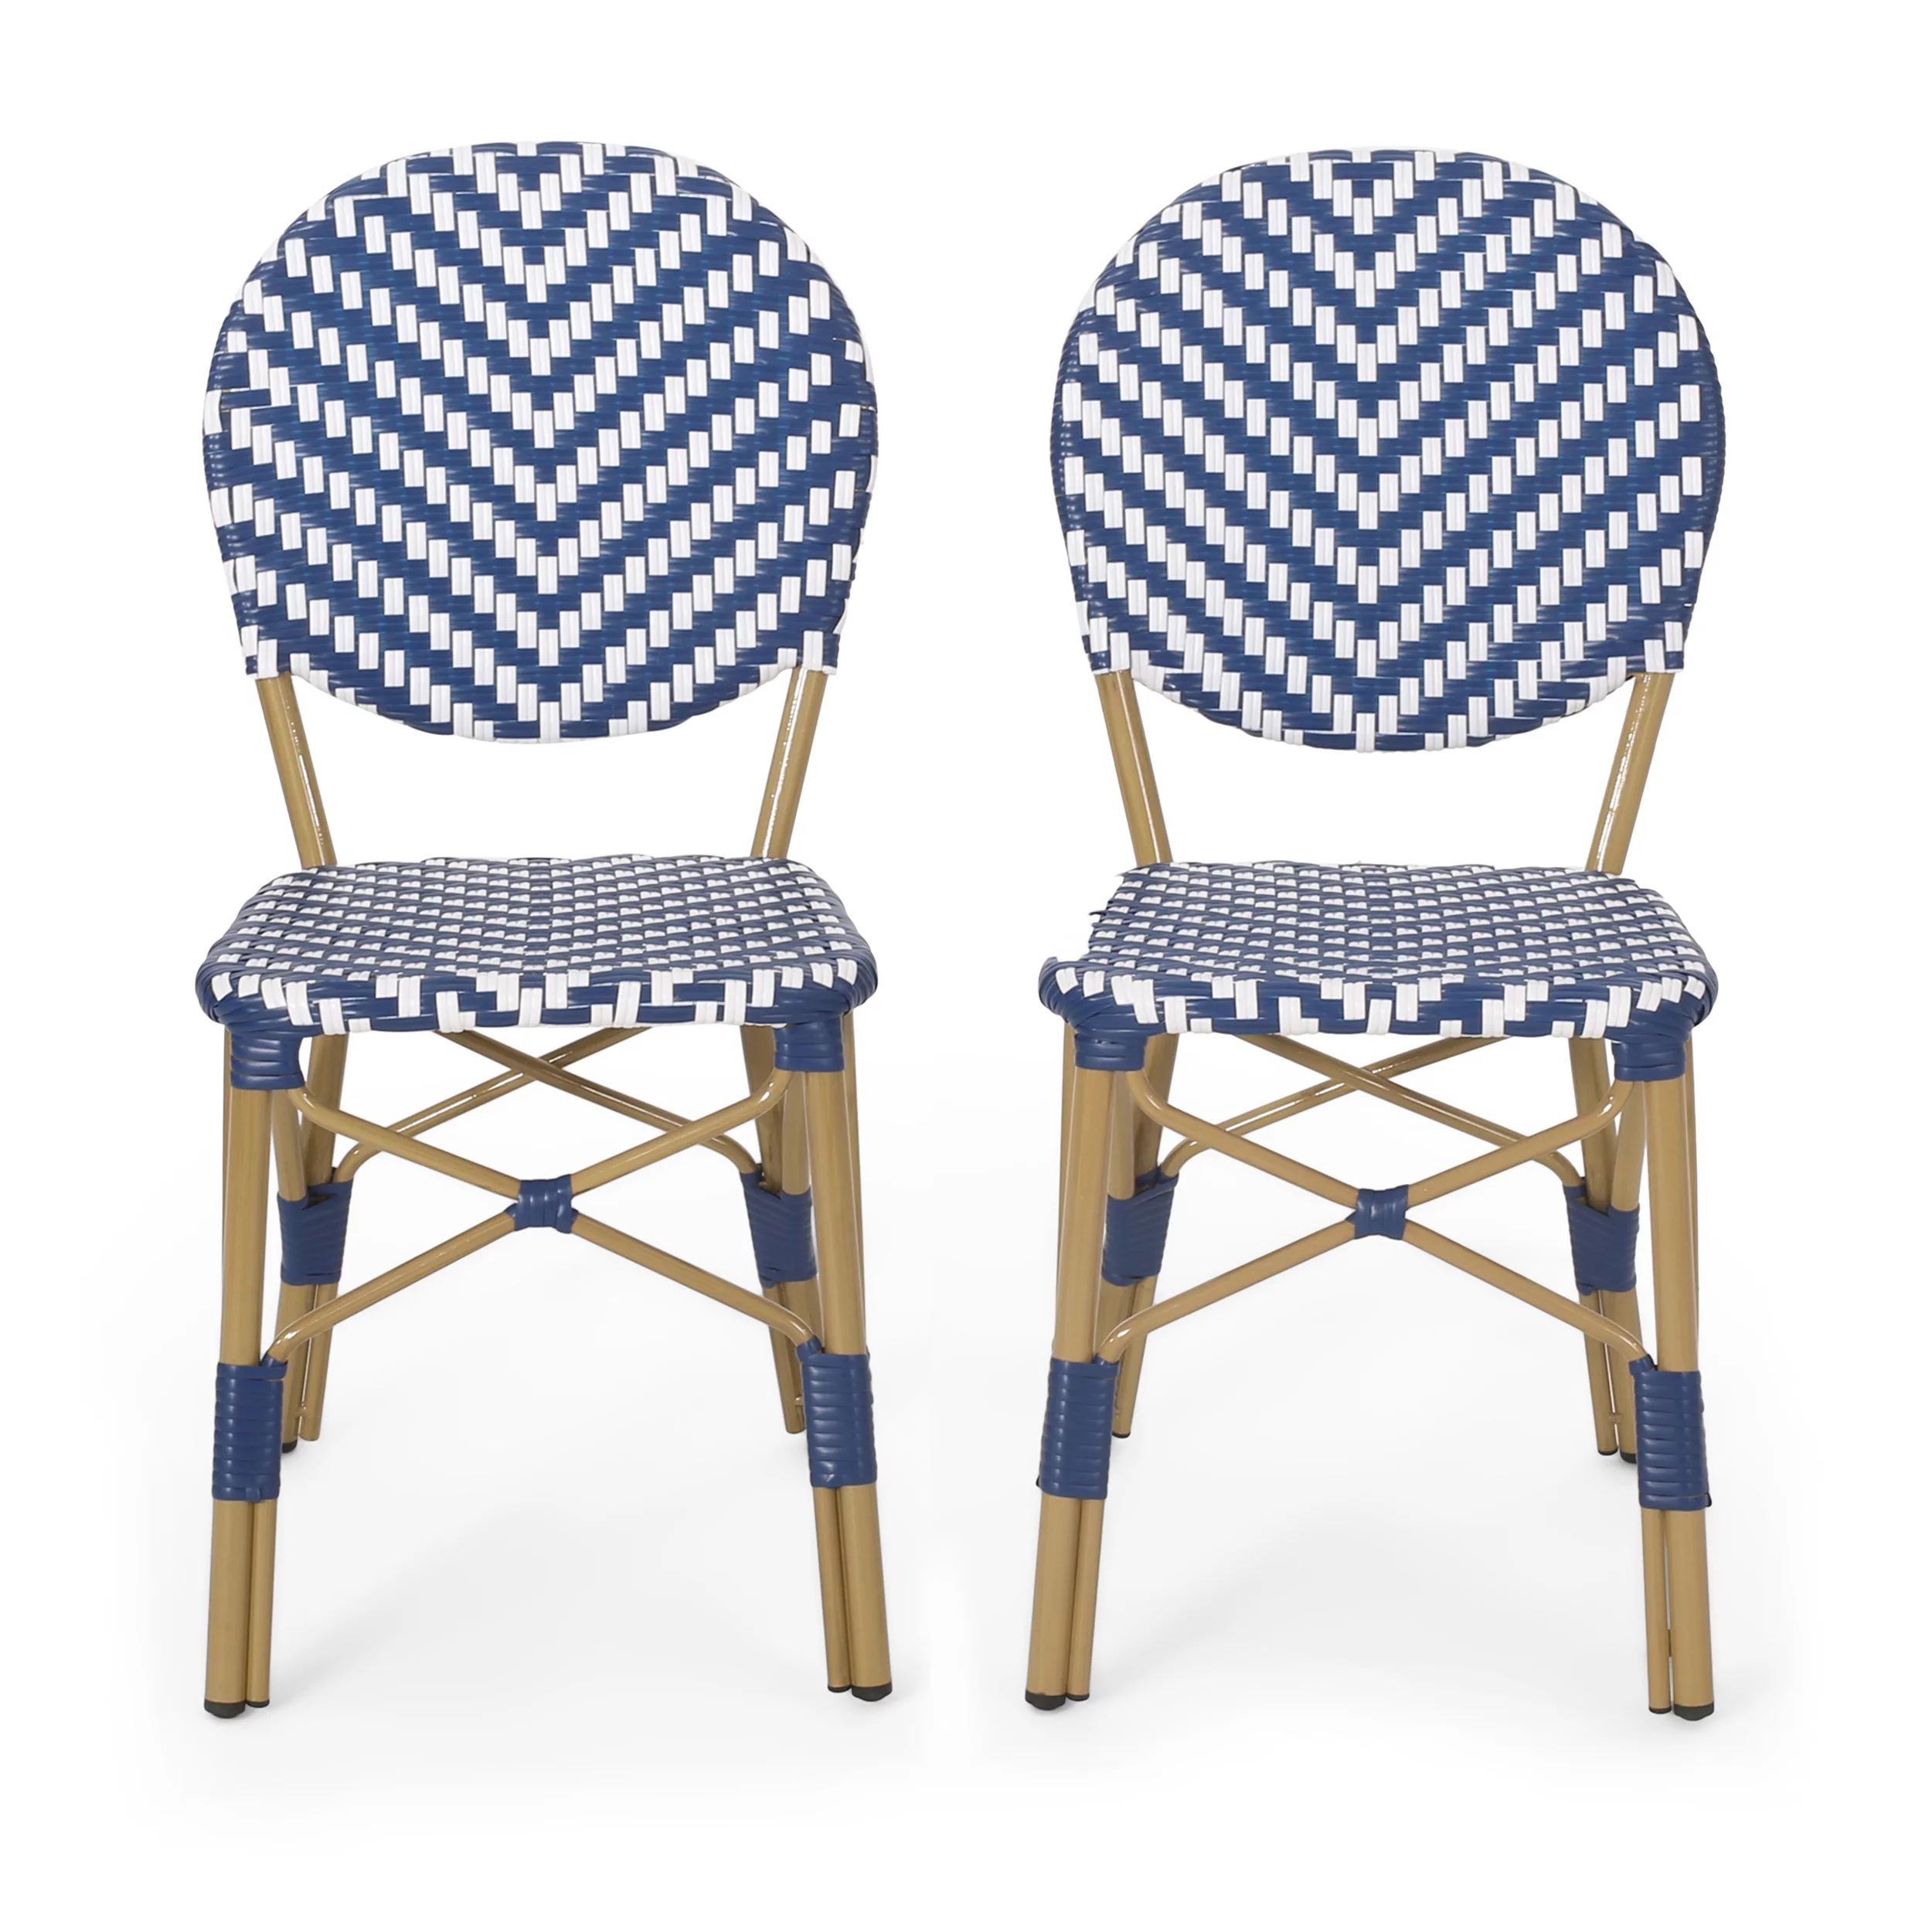 Deshler Outdoor Aluminum French Bistro Chairs (Set of 2), Navy Blue, White, and Bamboo Finish - W... | Walmart (US)